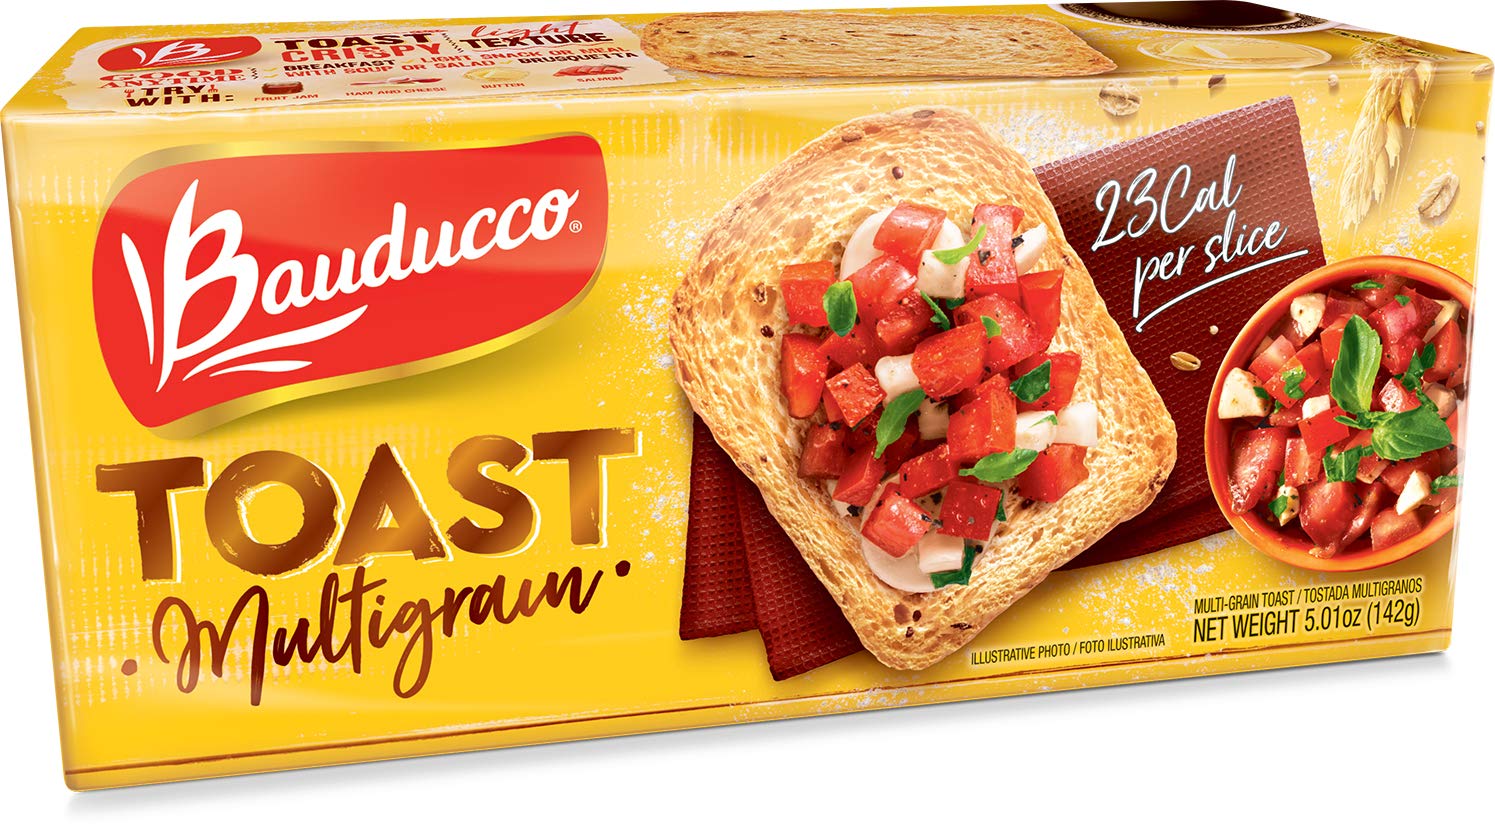 Bauducco Multi-Grain Toast - Delicious, Light & Crispy Toasted Bread - Ready-to-Eat Breakfast Toast & Sandwich Bread - No Artificial Flavors - 5.01 oz (Pack of 1)